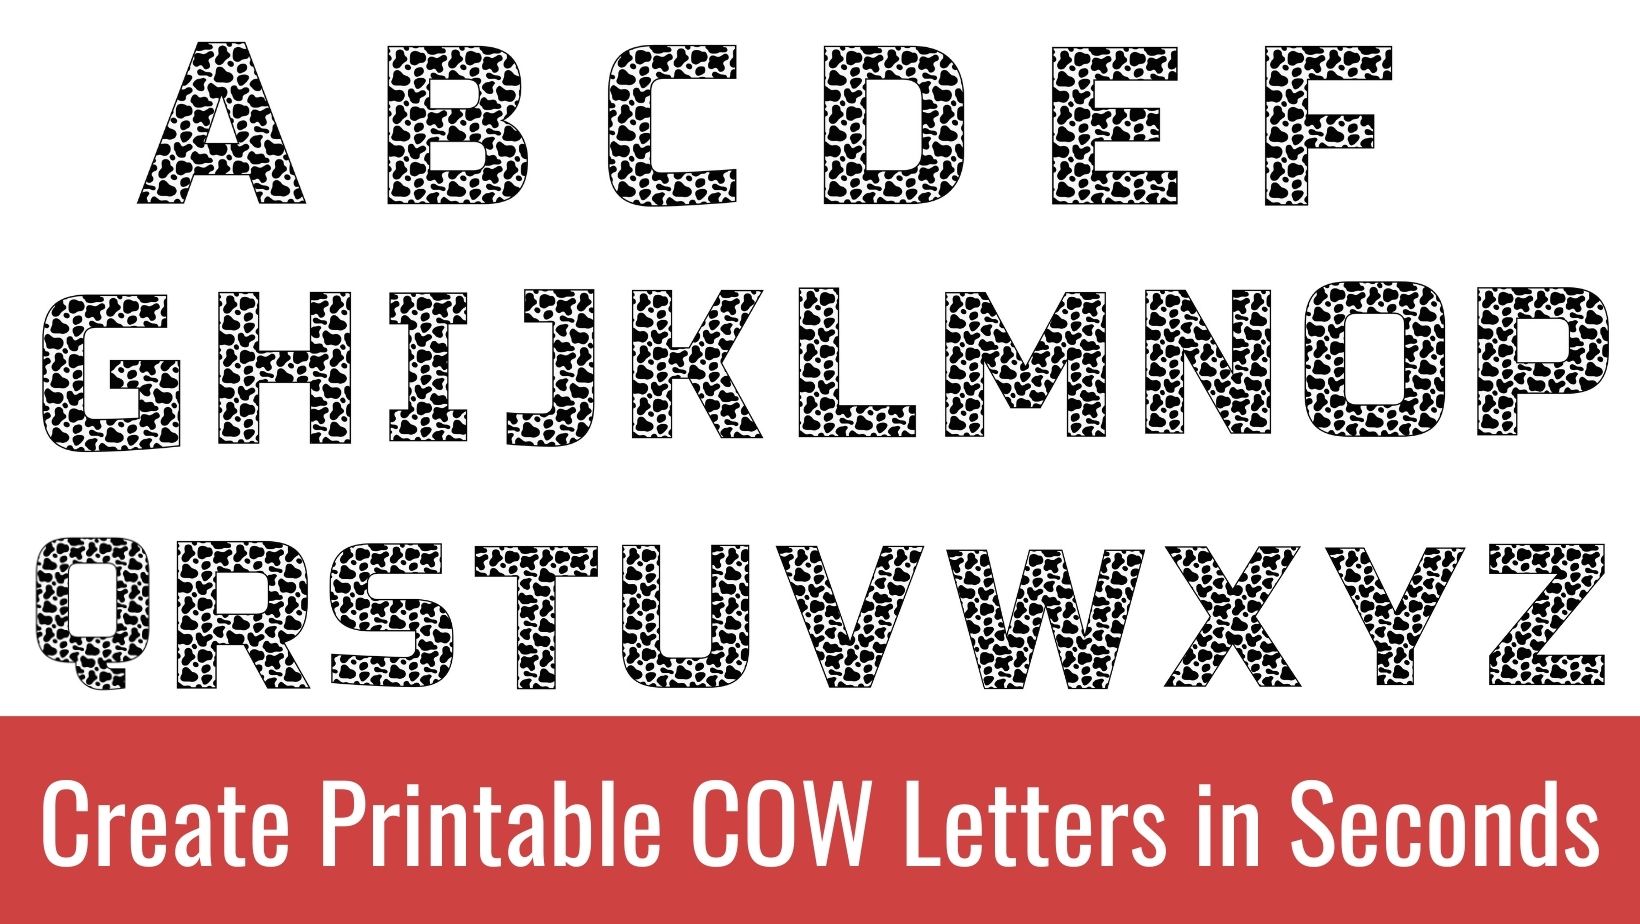 Printable cow Letters: Free Alphabet Font and Letter Templates